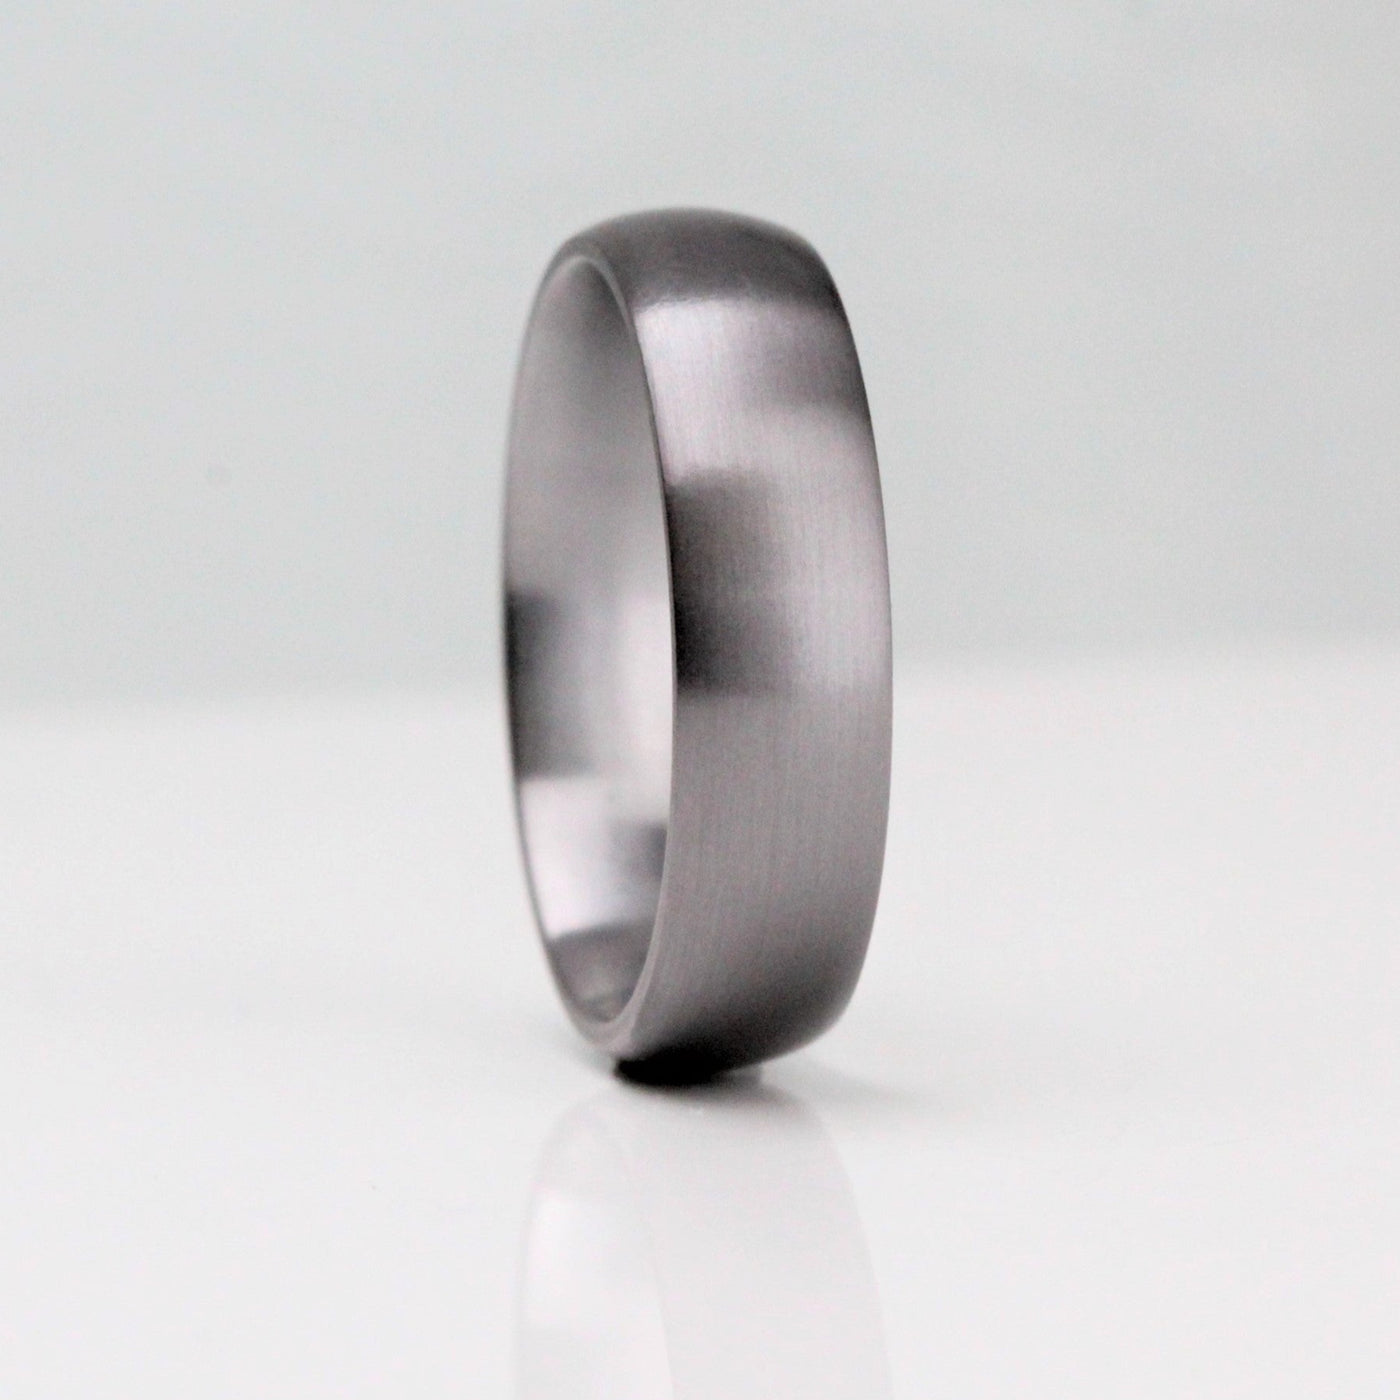 Classic court shape Tantalum wedding ring. 6mm wide in a brushed finish